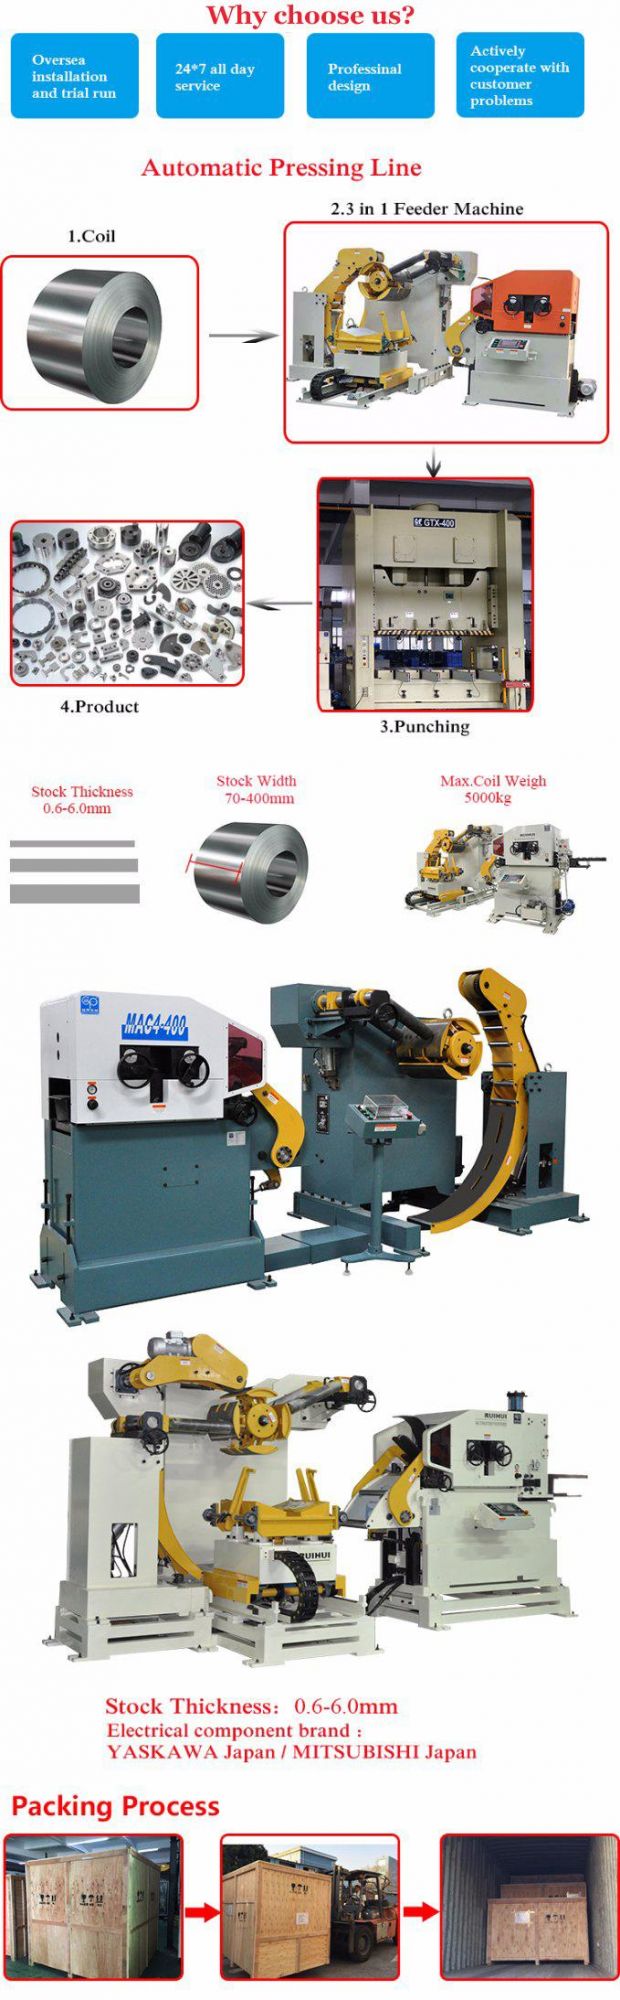 in Press Machine Ues Automatic Feeder with Straightener and Uncoiler